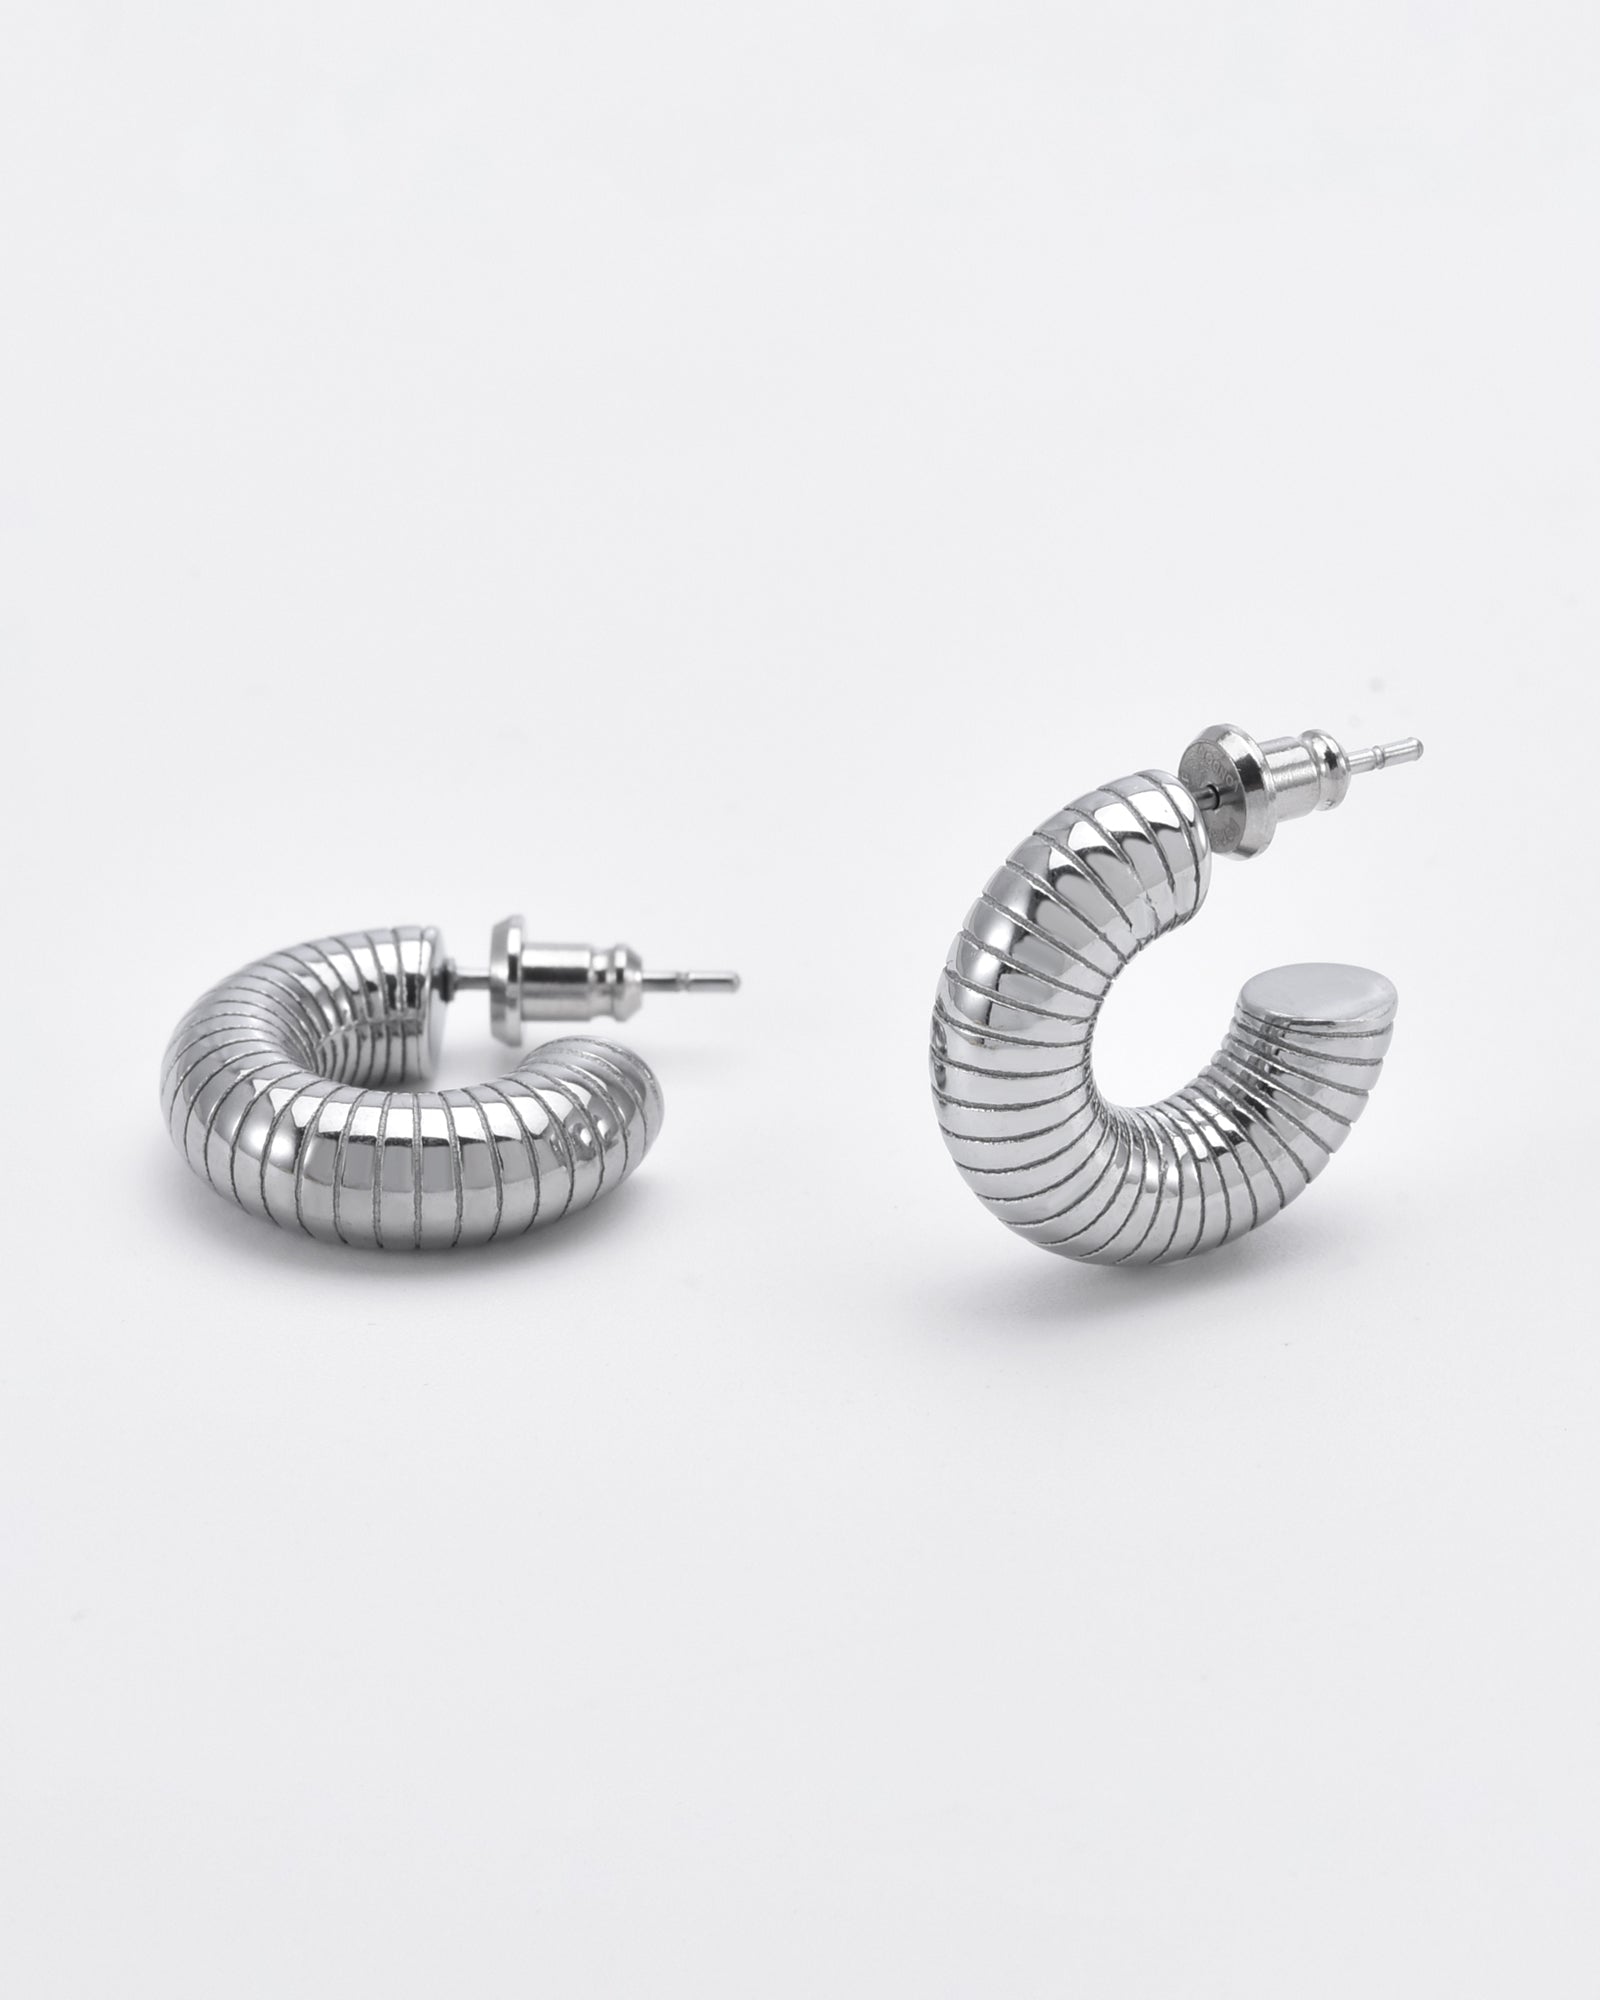 A pair of Daisy Earrings Silver by For Art's Sake® are shown against a plain white background. The earrings have a coiled design, resembling springs, and are slightly open at the ends where the earring posts and backs are visible. Hypoallergenic and sleek, the overall design is modern and minimalist.